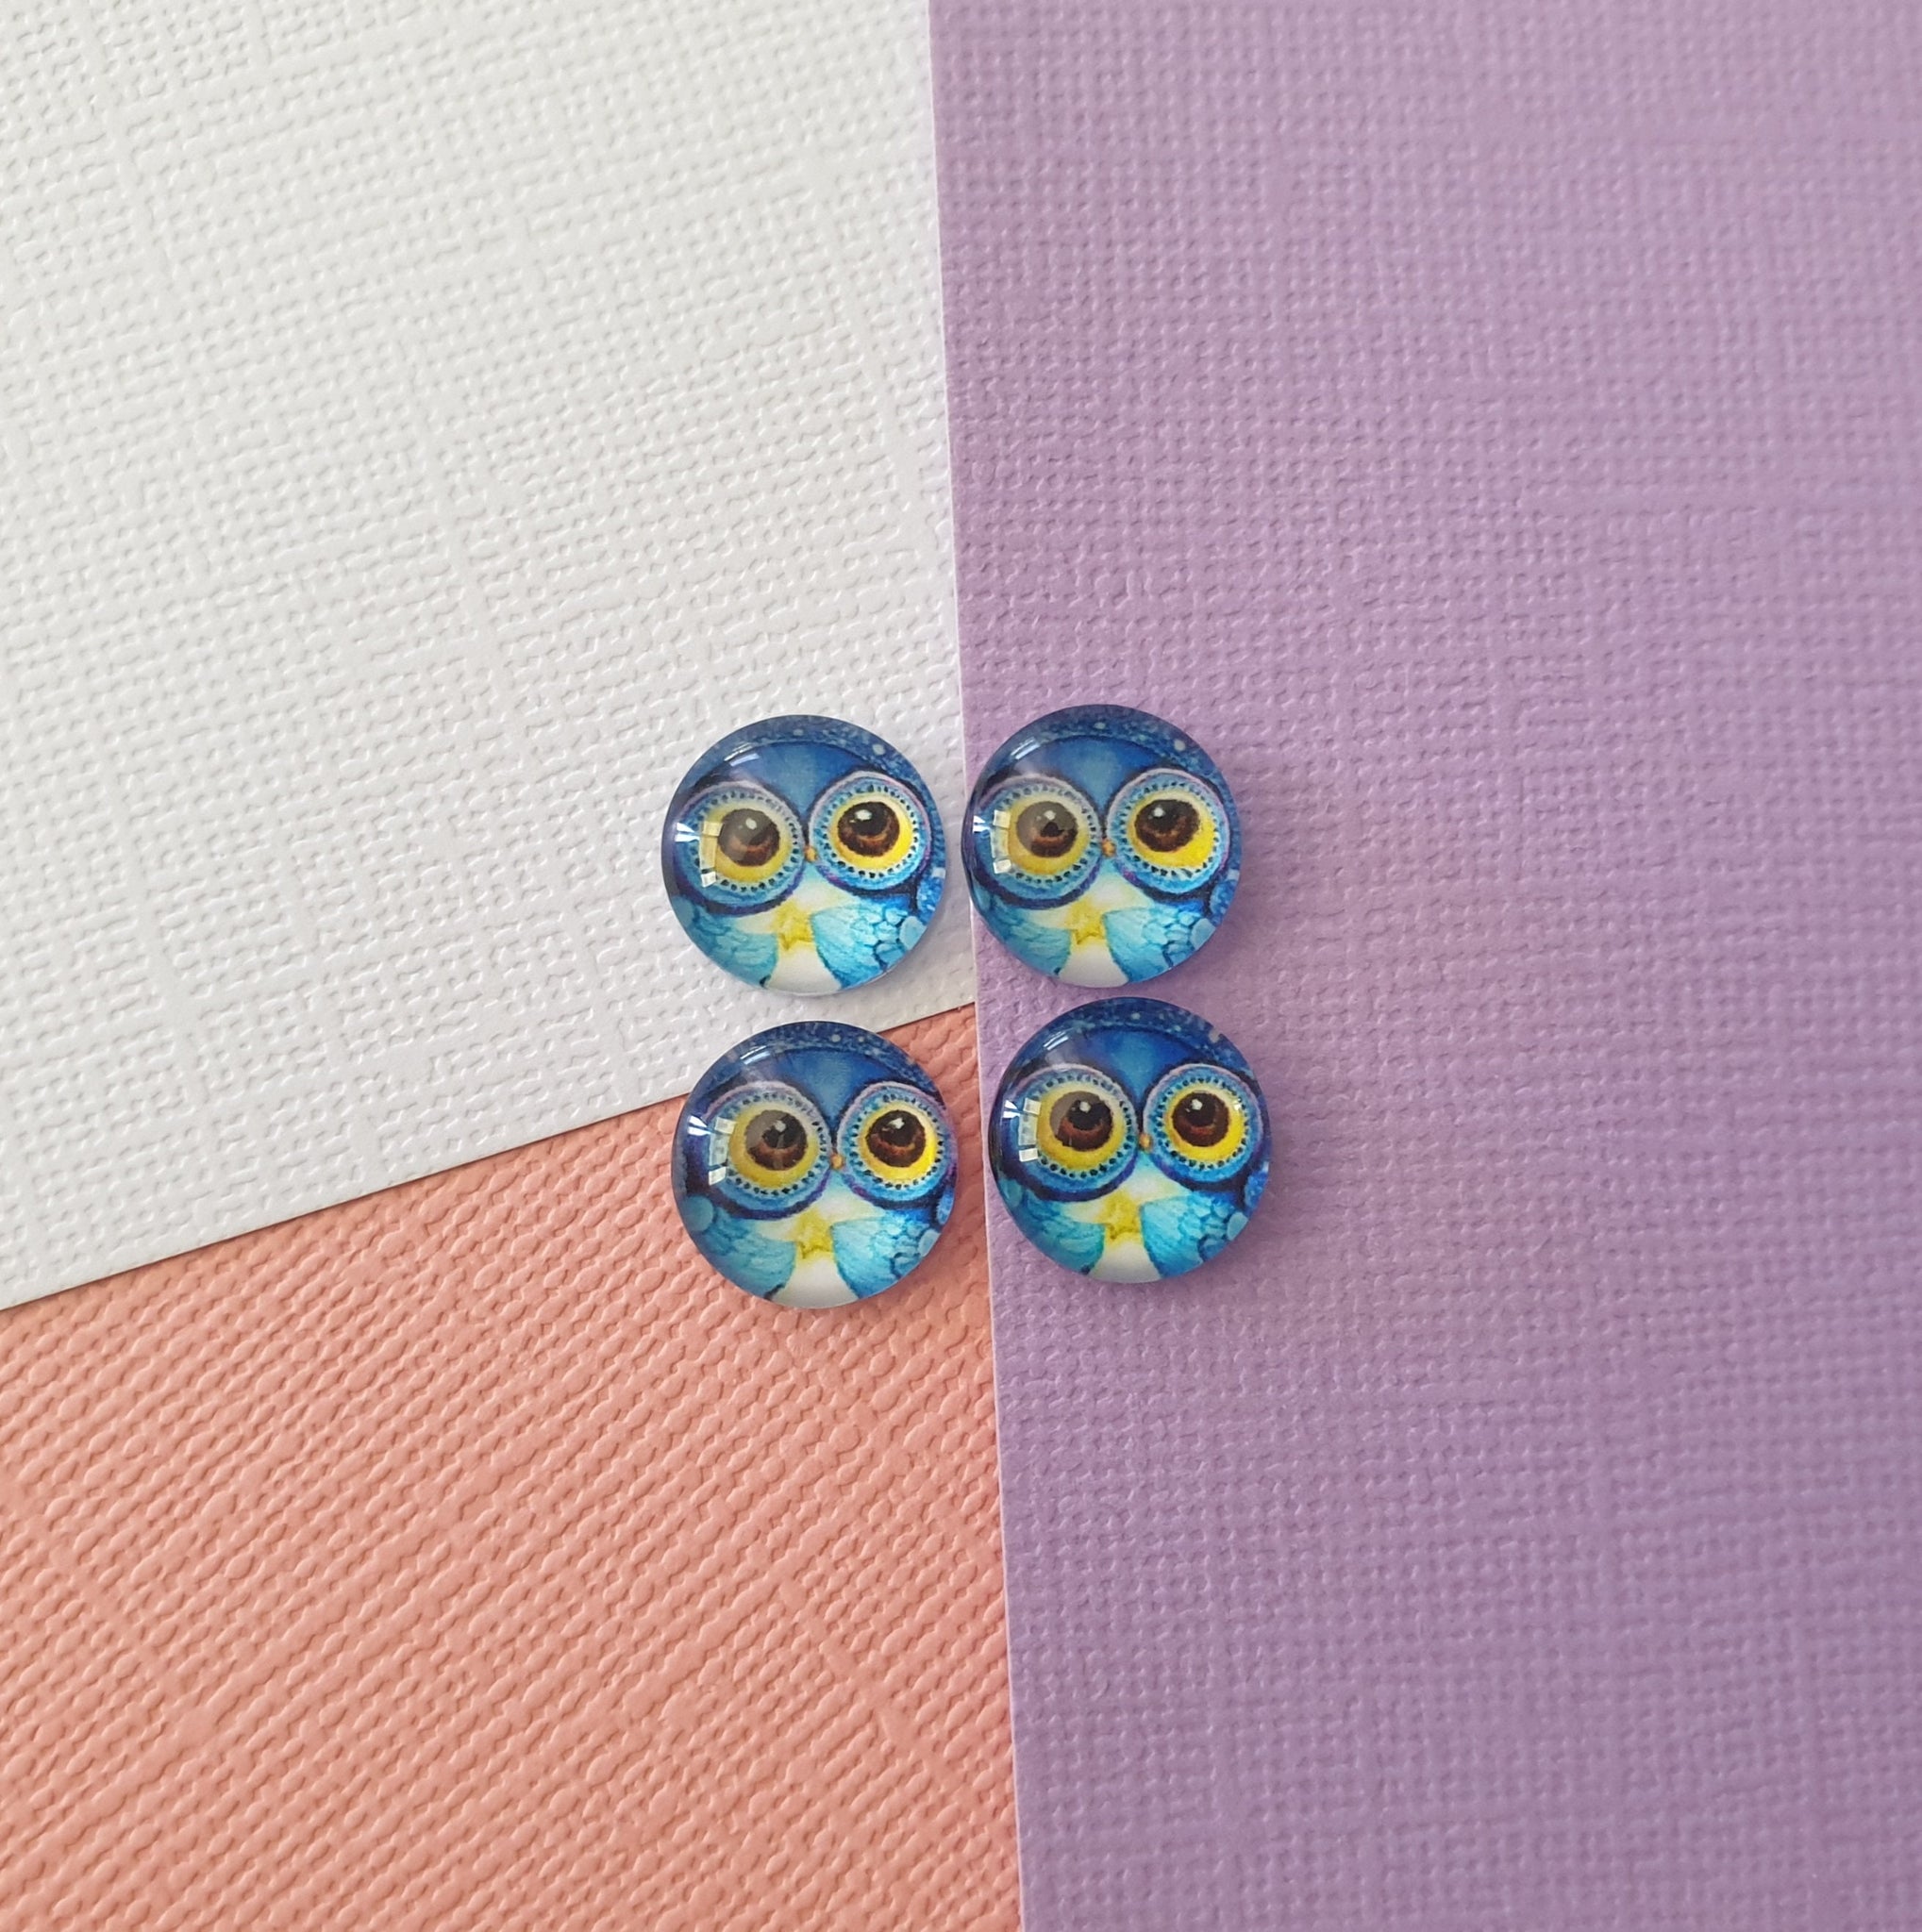 10pcs (5prs)  12mm Blue owl Handmade Glass Cabochons Pattern Domed Jewellery Accessories Supplies australia wholesale earrings